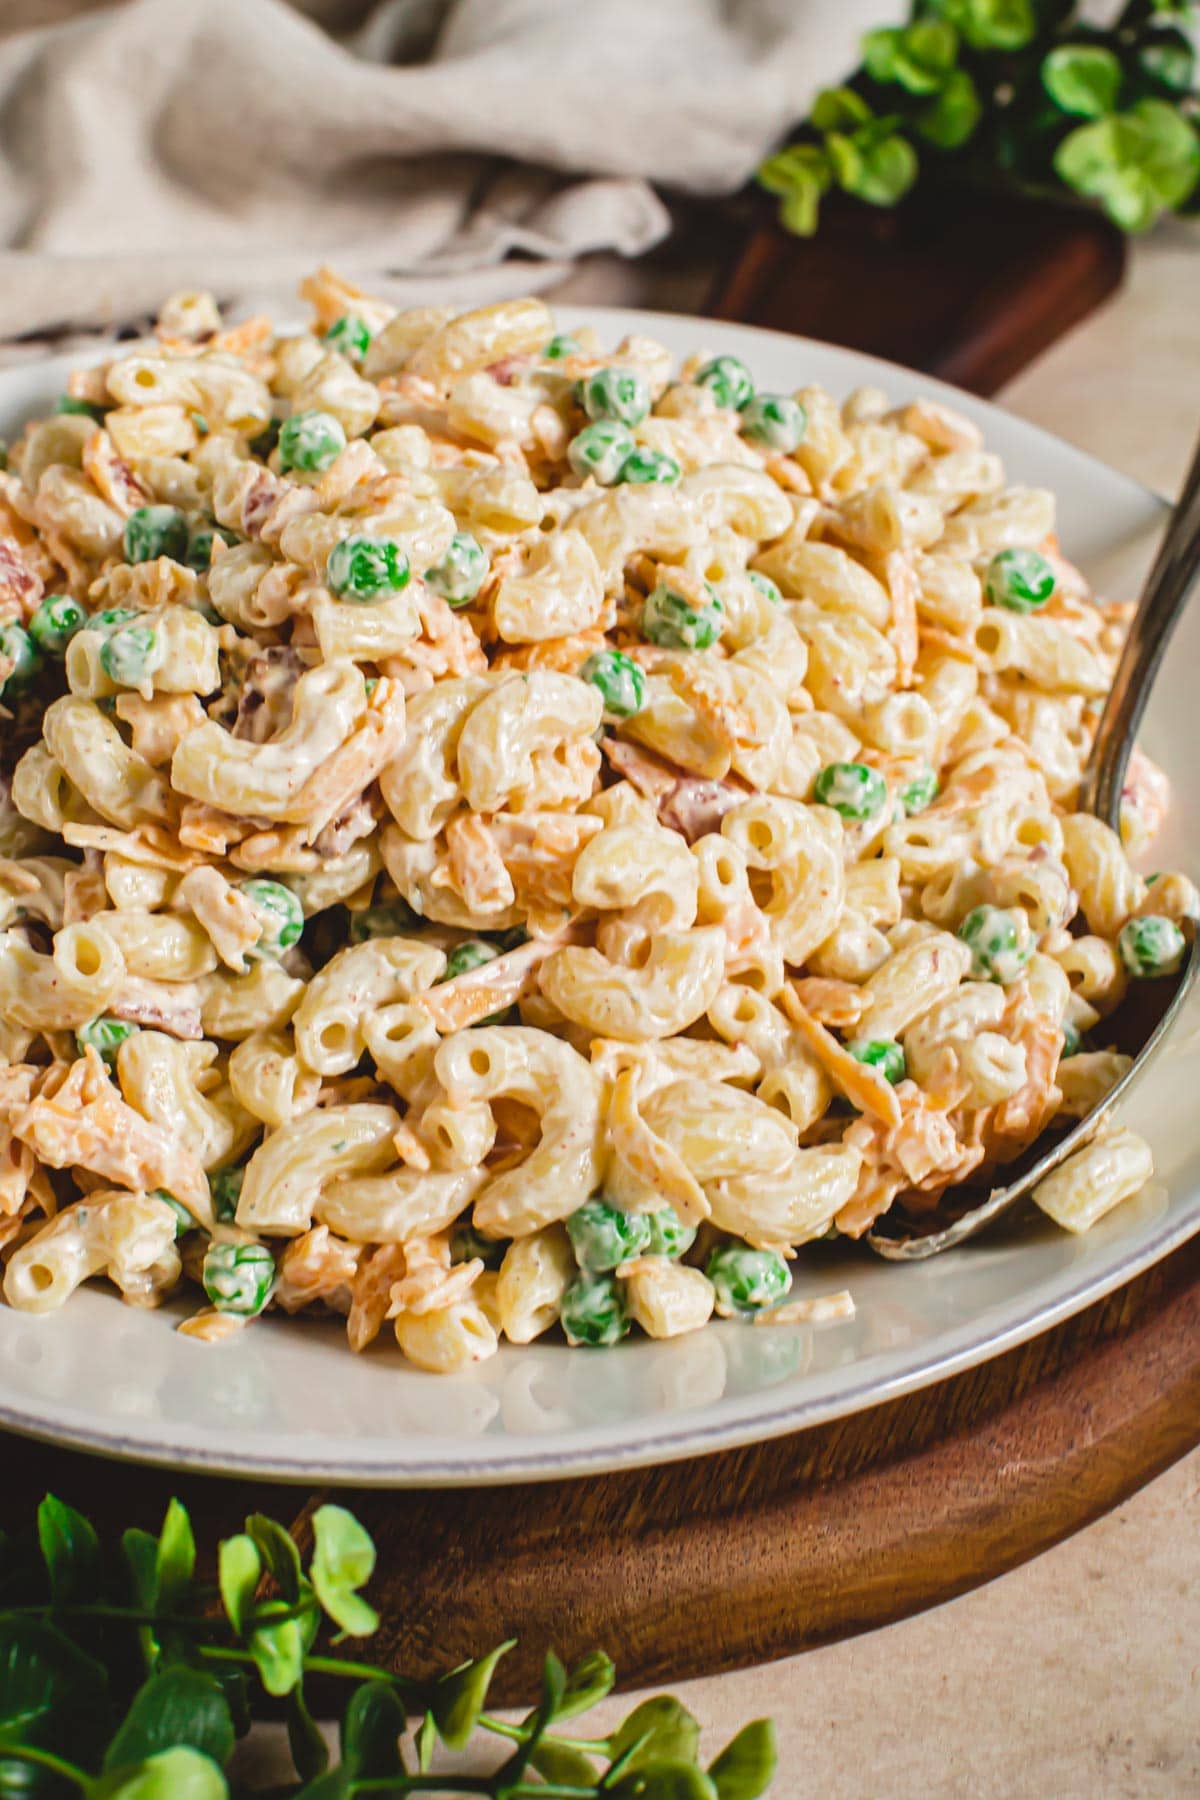 Bacon ranch pasta salad with peas in a bowl.